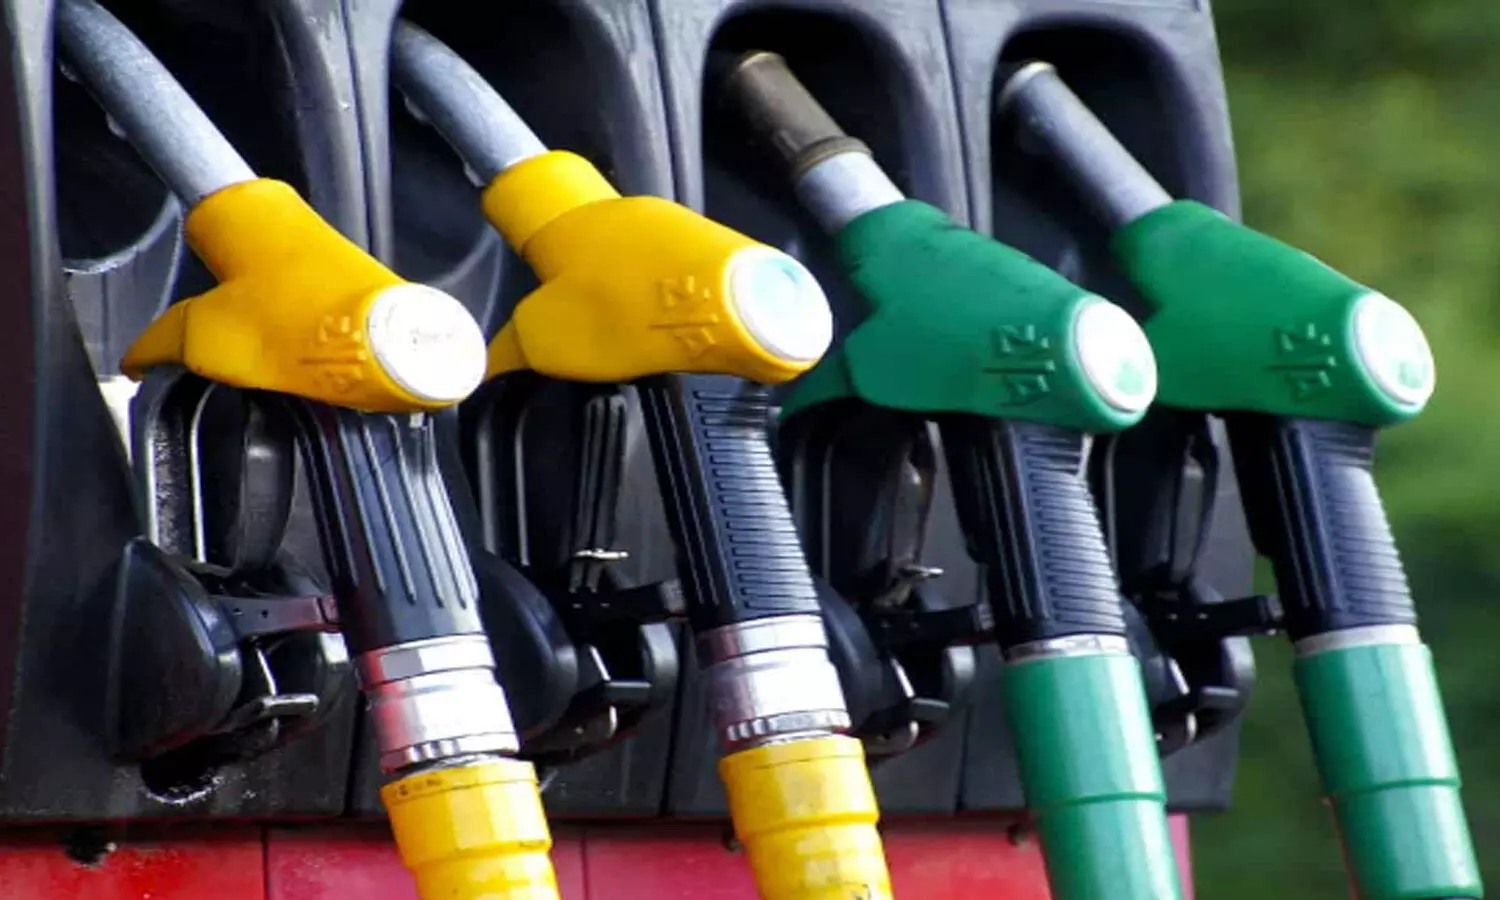 Petrol Diesel Price: Fuel rates touch new highs again, Check!